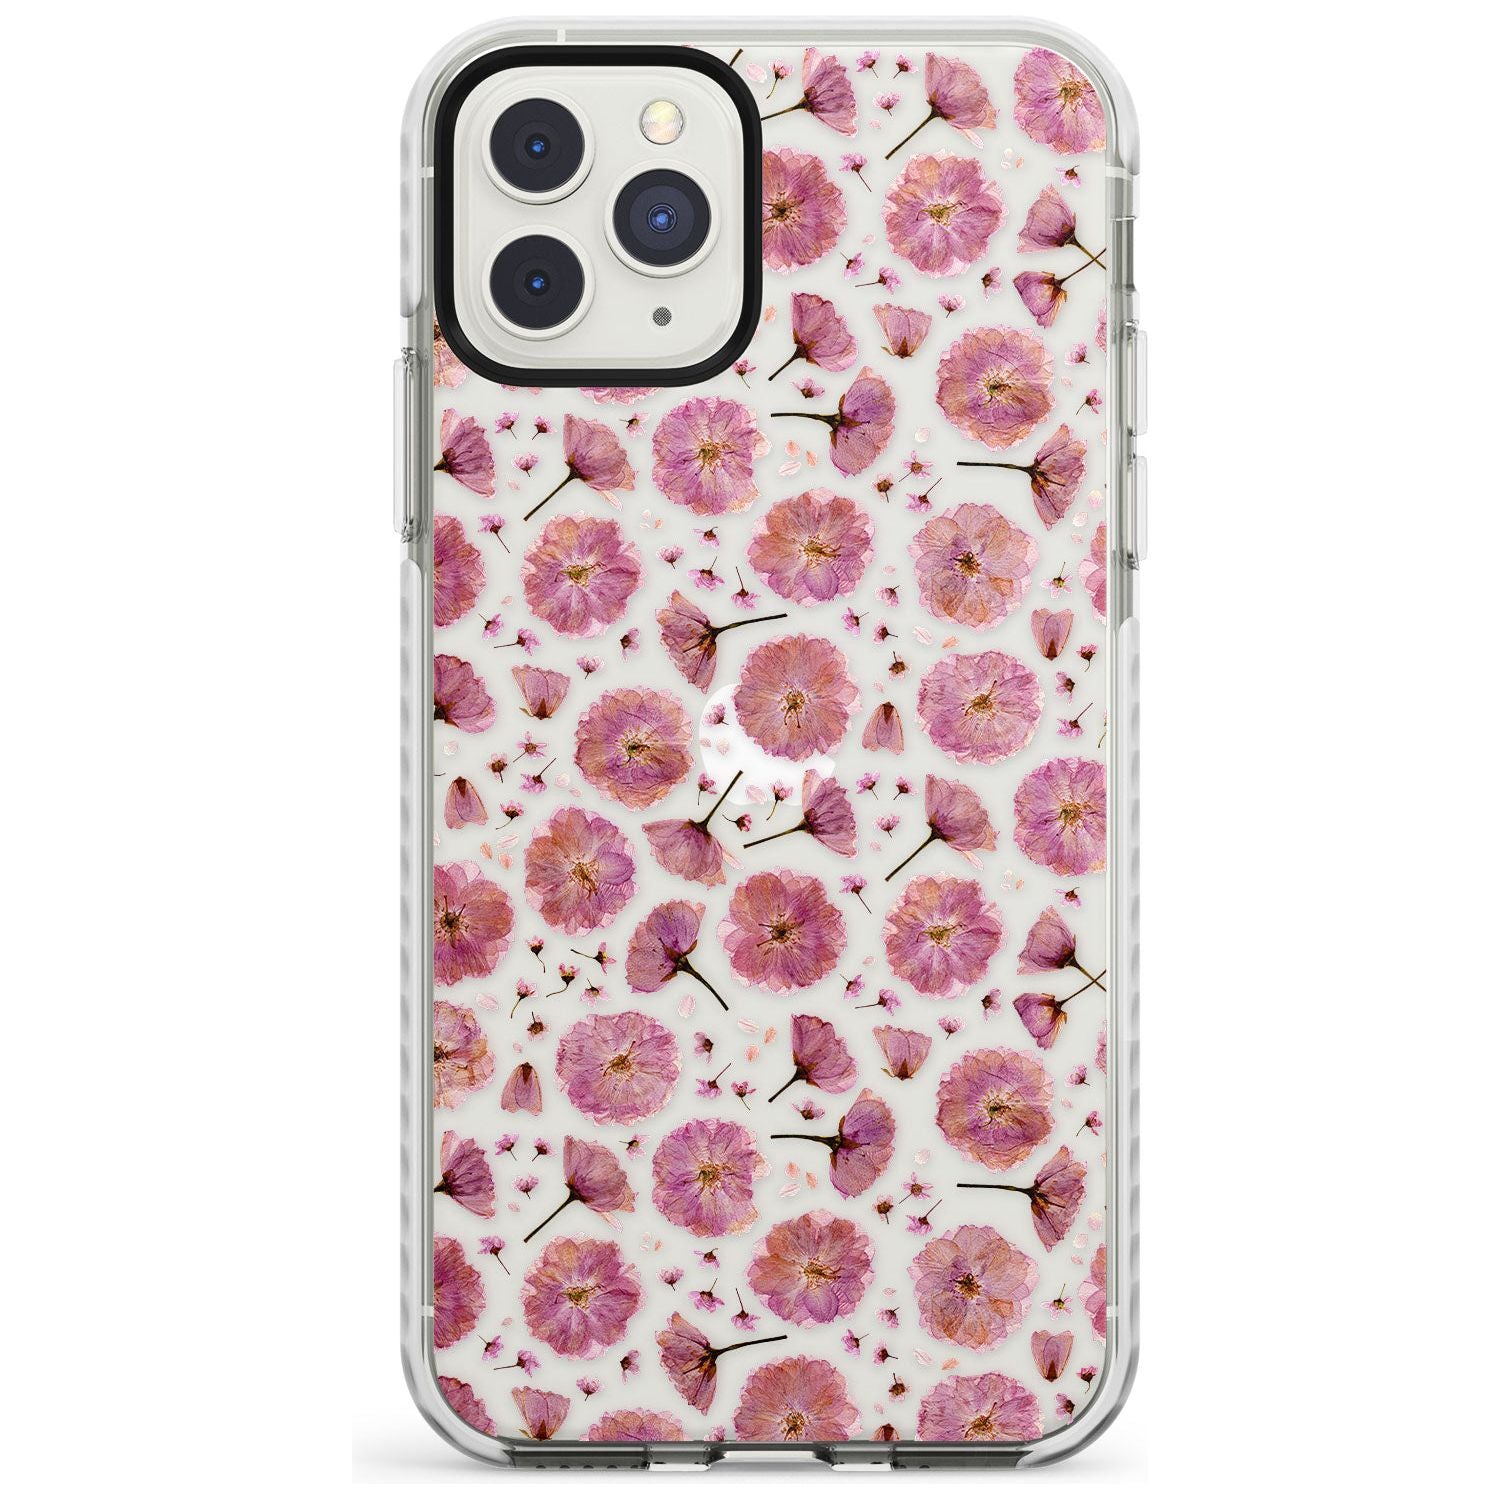 Pink Flowers & Blossoms Transparent Design Impact Phone Case for iPhone 11 Pro Max